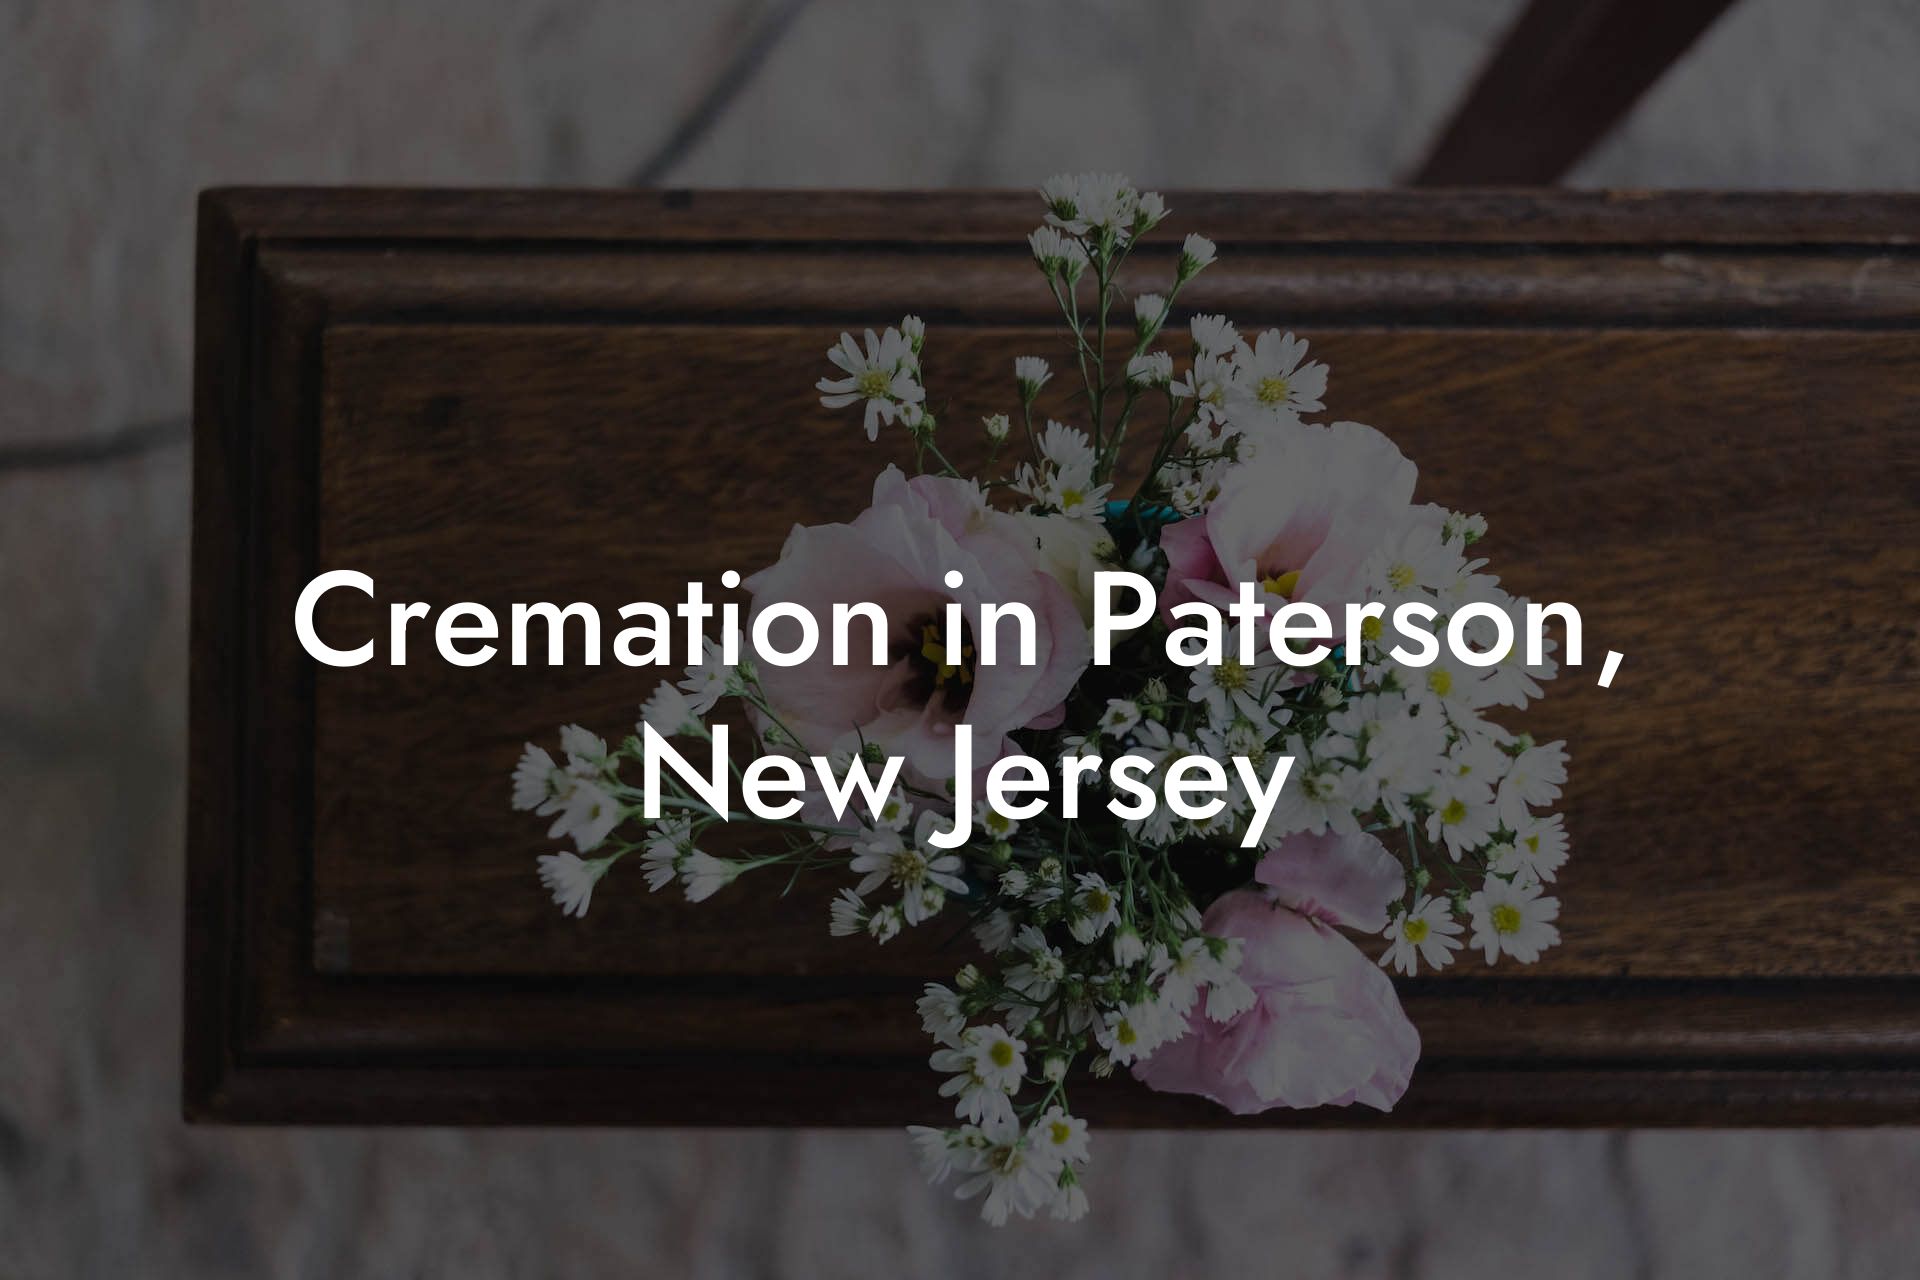 Cremation in Paterson, New Jersey